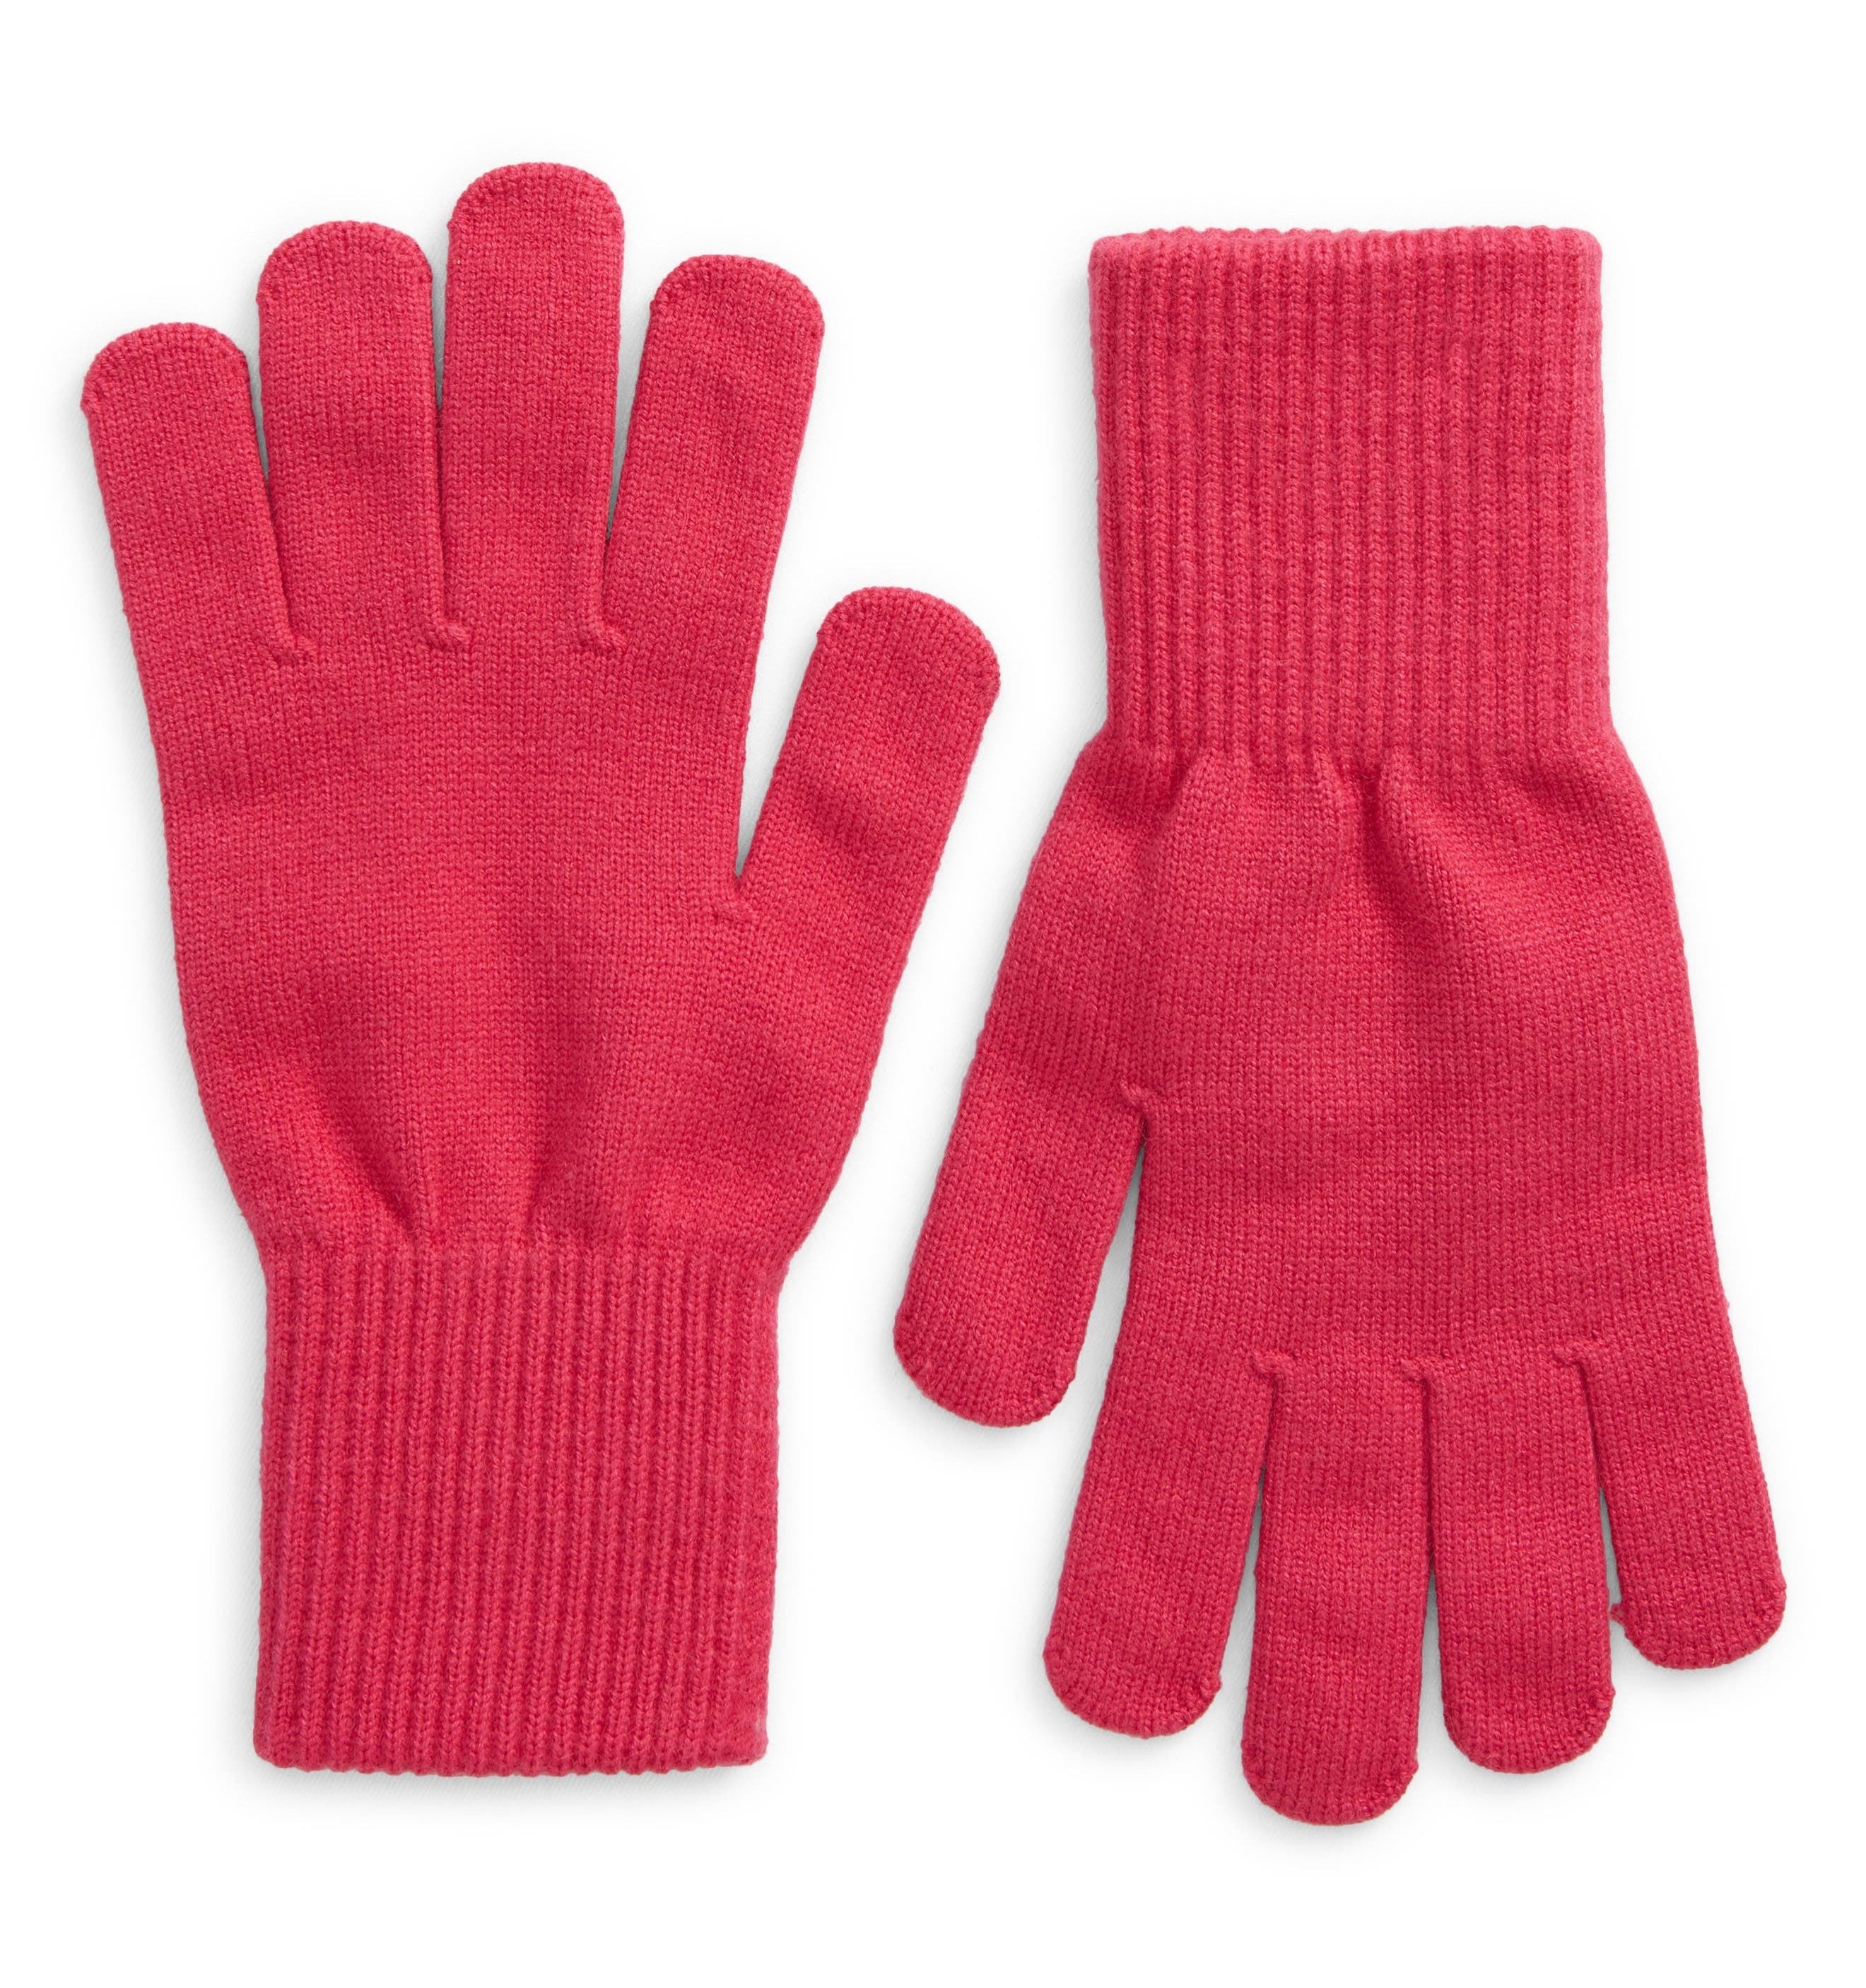 red knit gloves lying on a white background